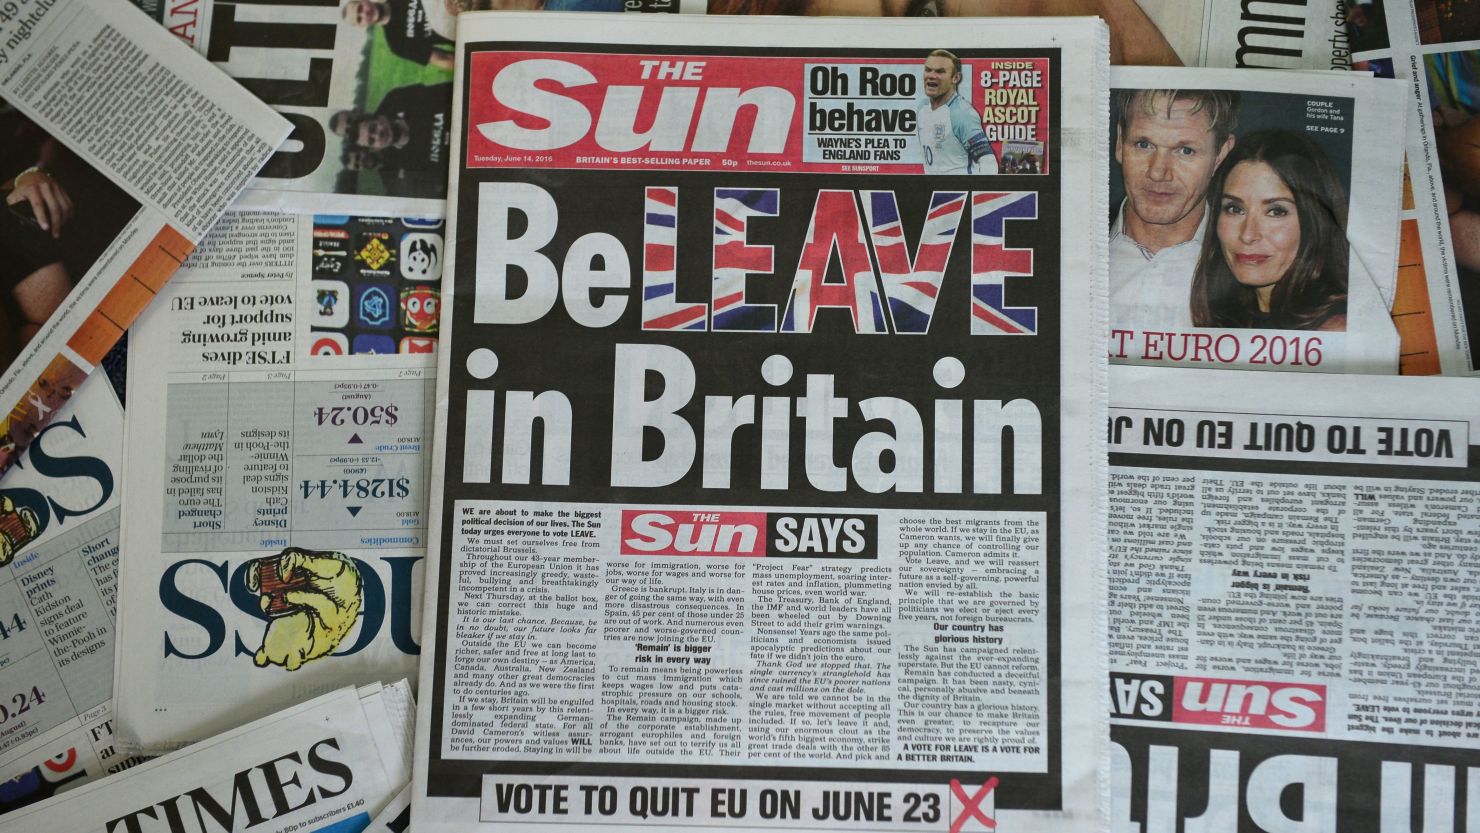 Britain's The Sun urges readers to vote to leave the European Union in an editorial splashed across its front page.